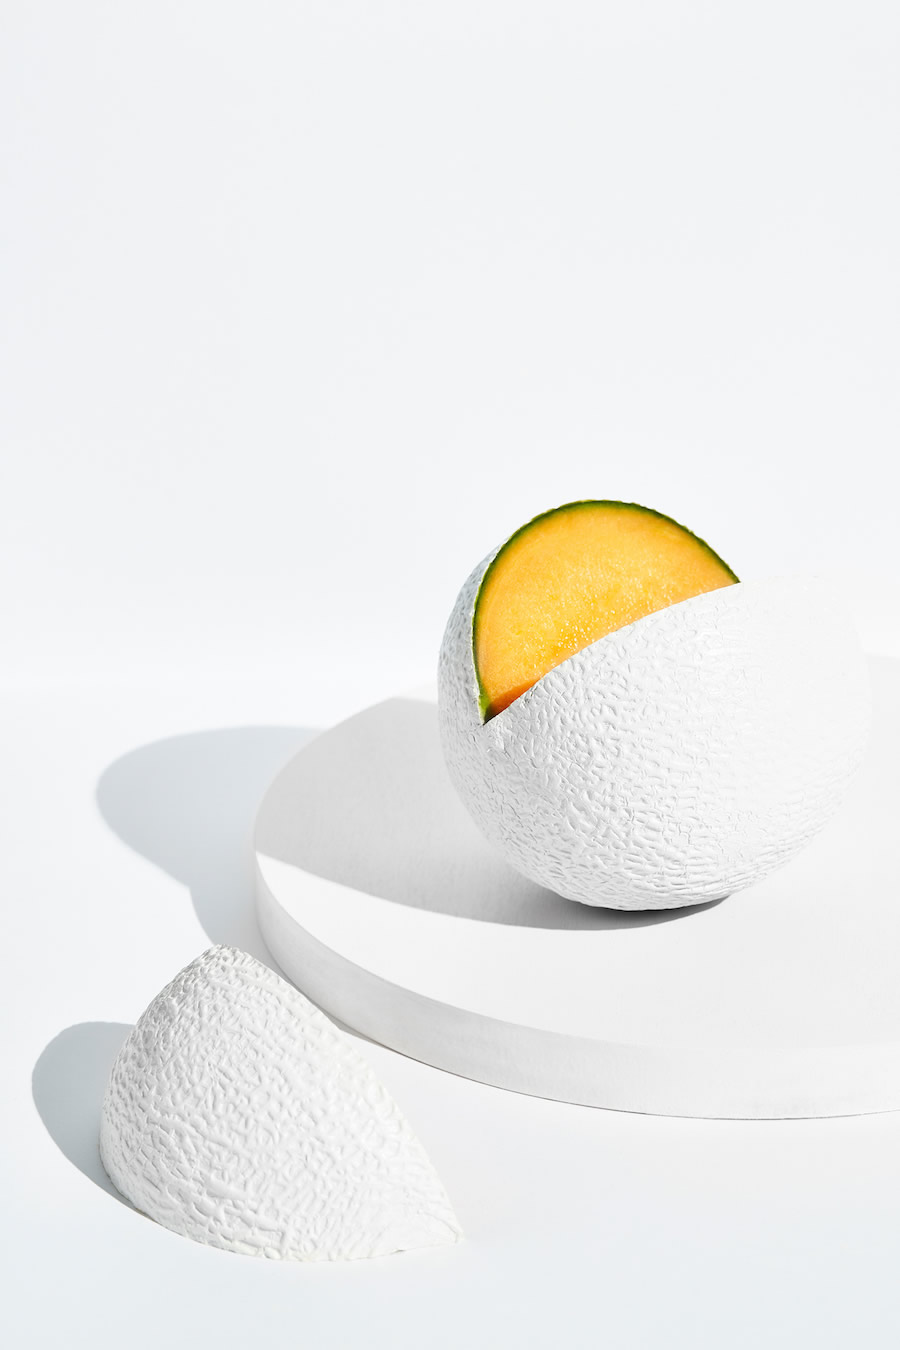 White: Creative & Conceptual Food Photography By Benito Martin And Gemma Lush